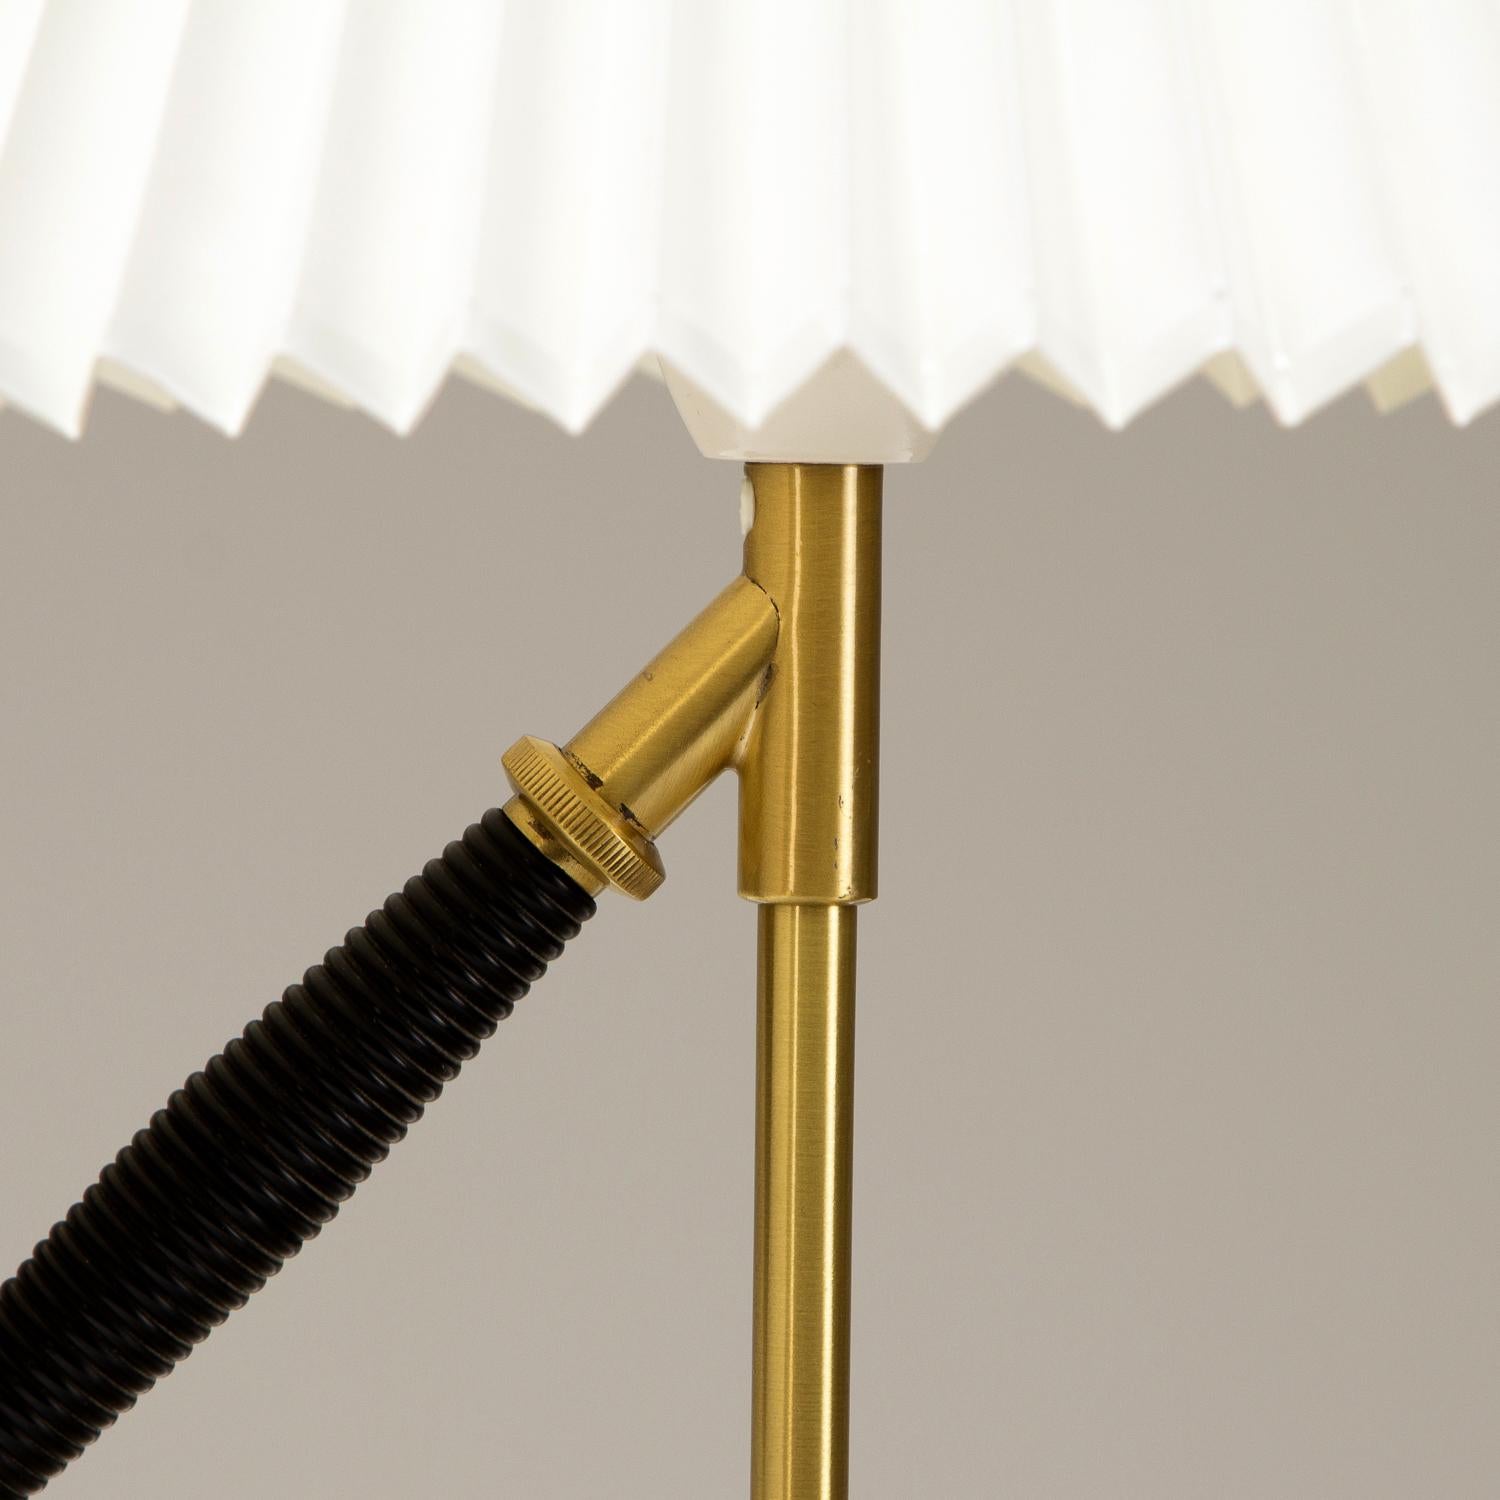 The iconic Model 306 by Kaare Klint for Le Klint. Designed in 1945 the Versatile Lamp, as it was known, can be either a table or wall lamp due to its ingenious tilting mechanism. In patinated brass with original bulb holder and switch with new Le